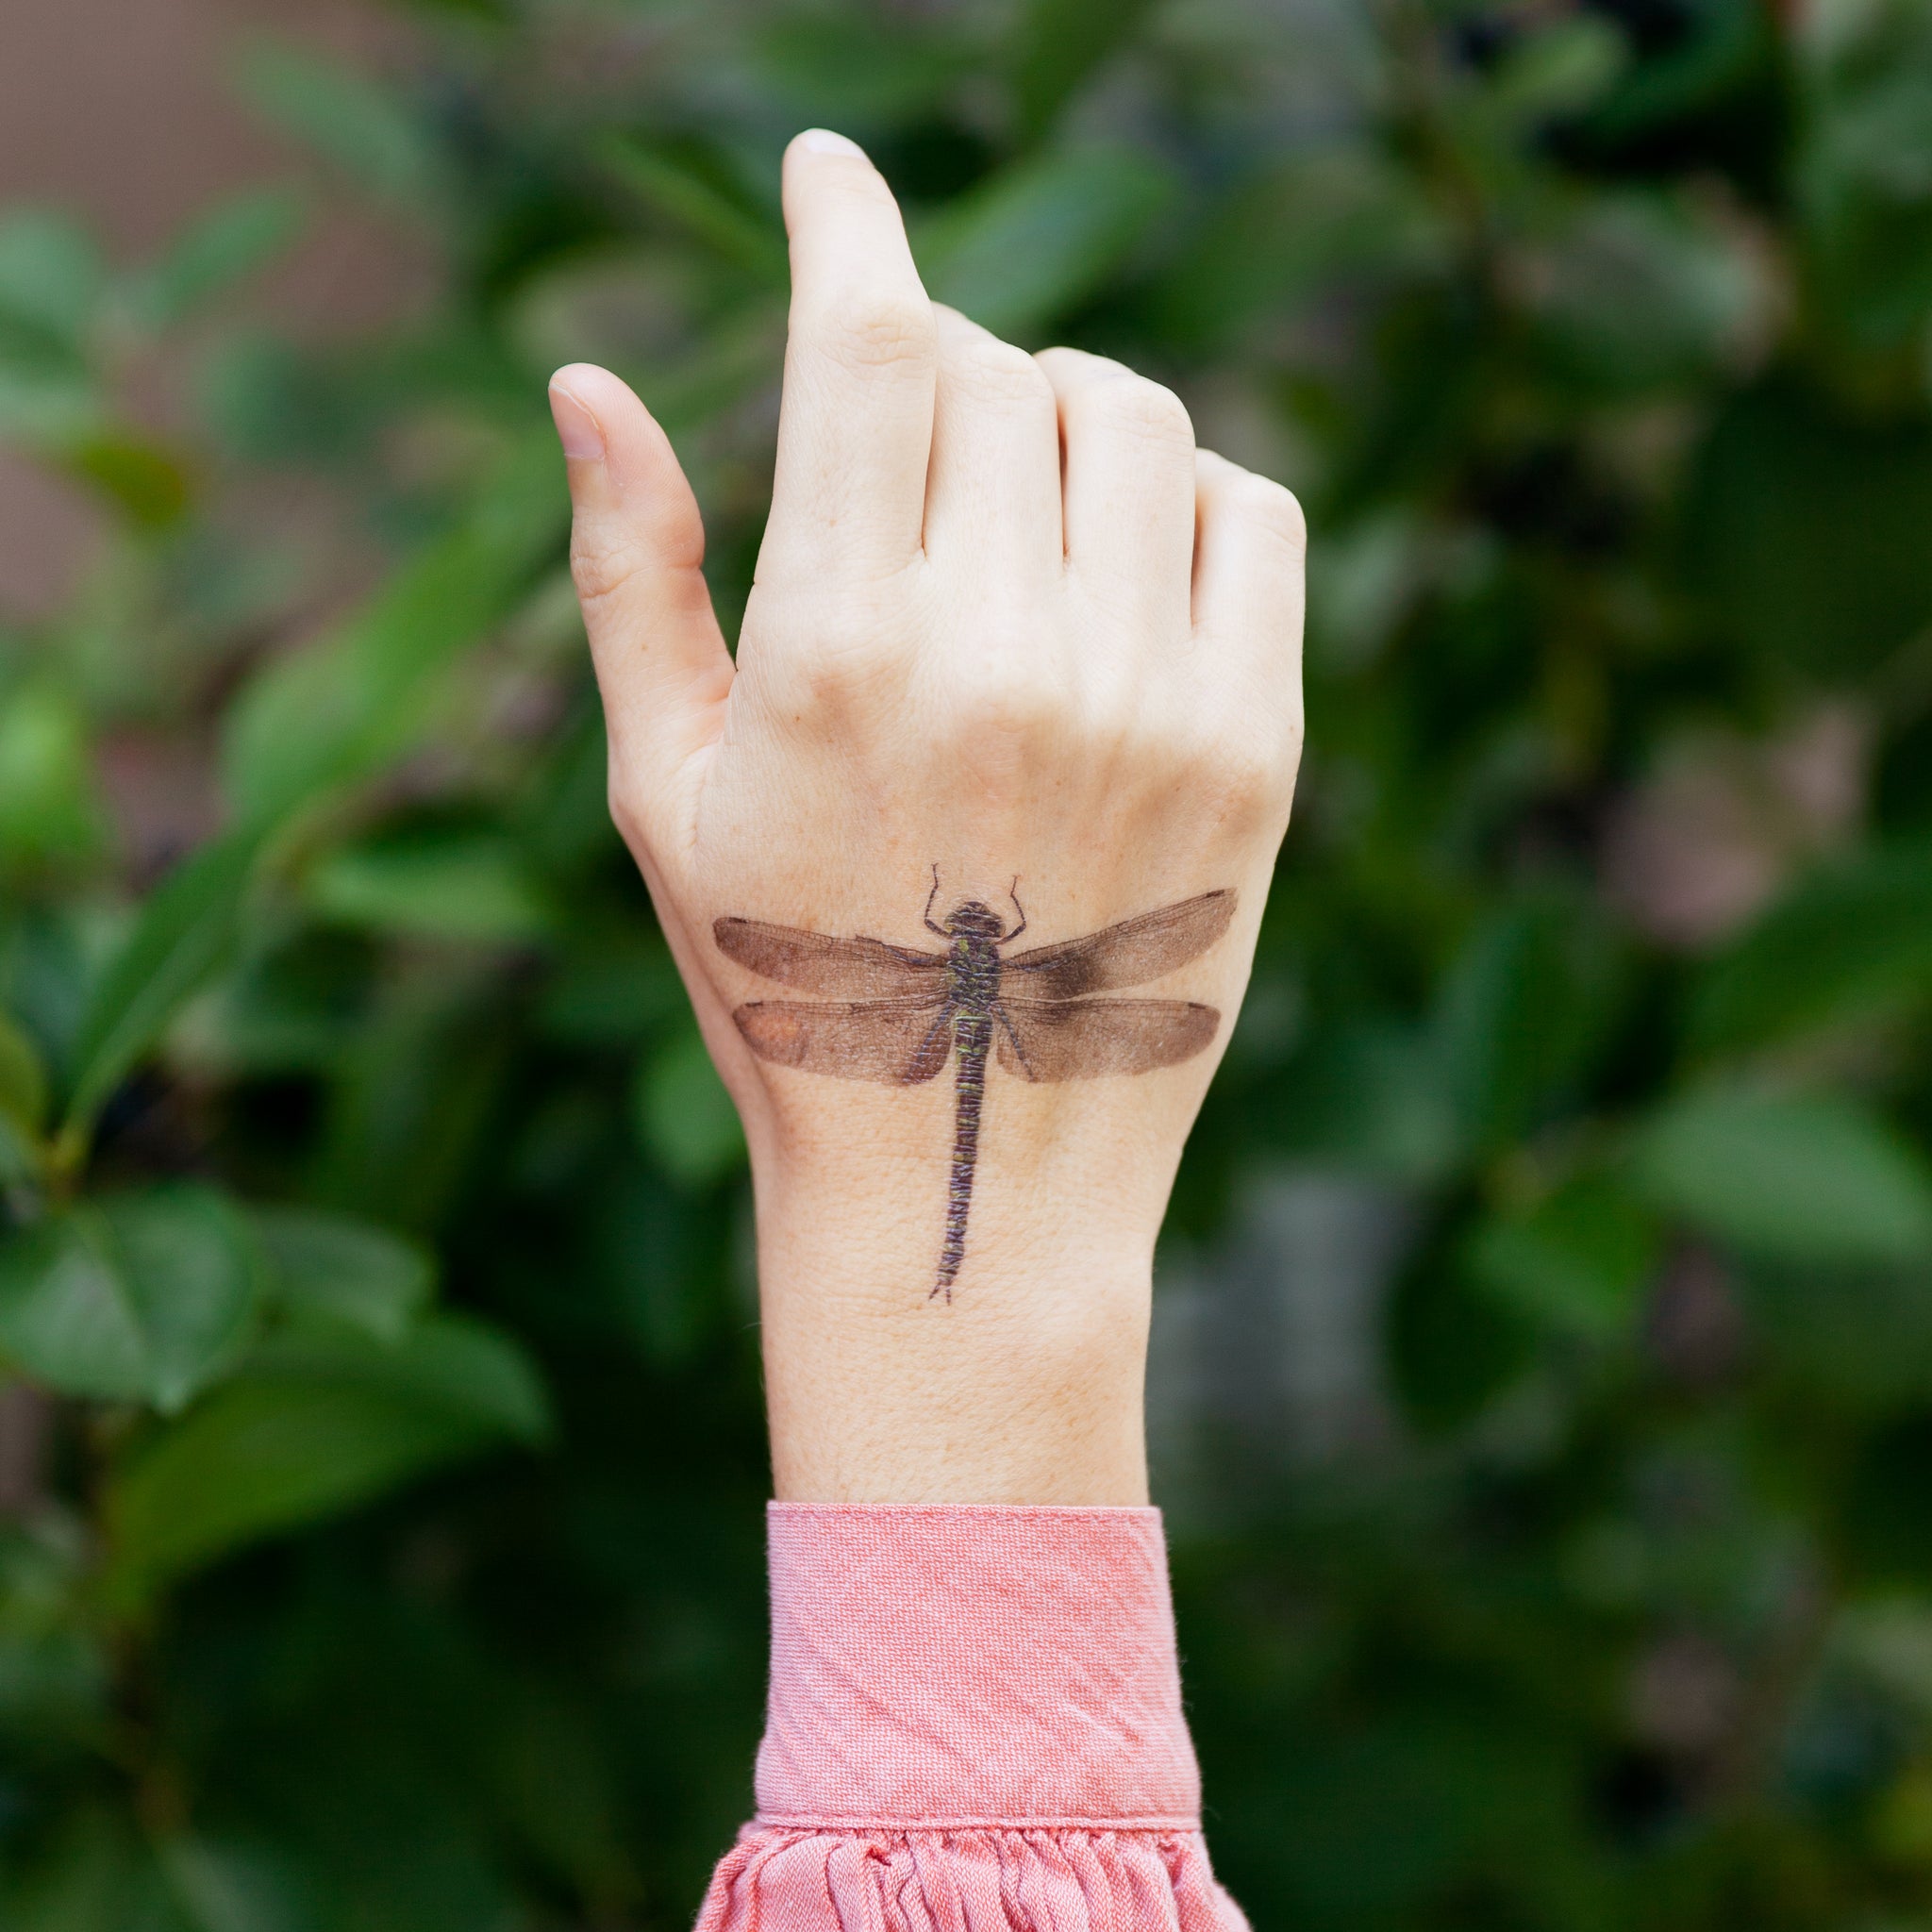 The girl with the dragonfly tattoo 